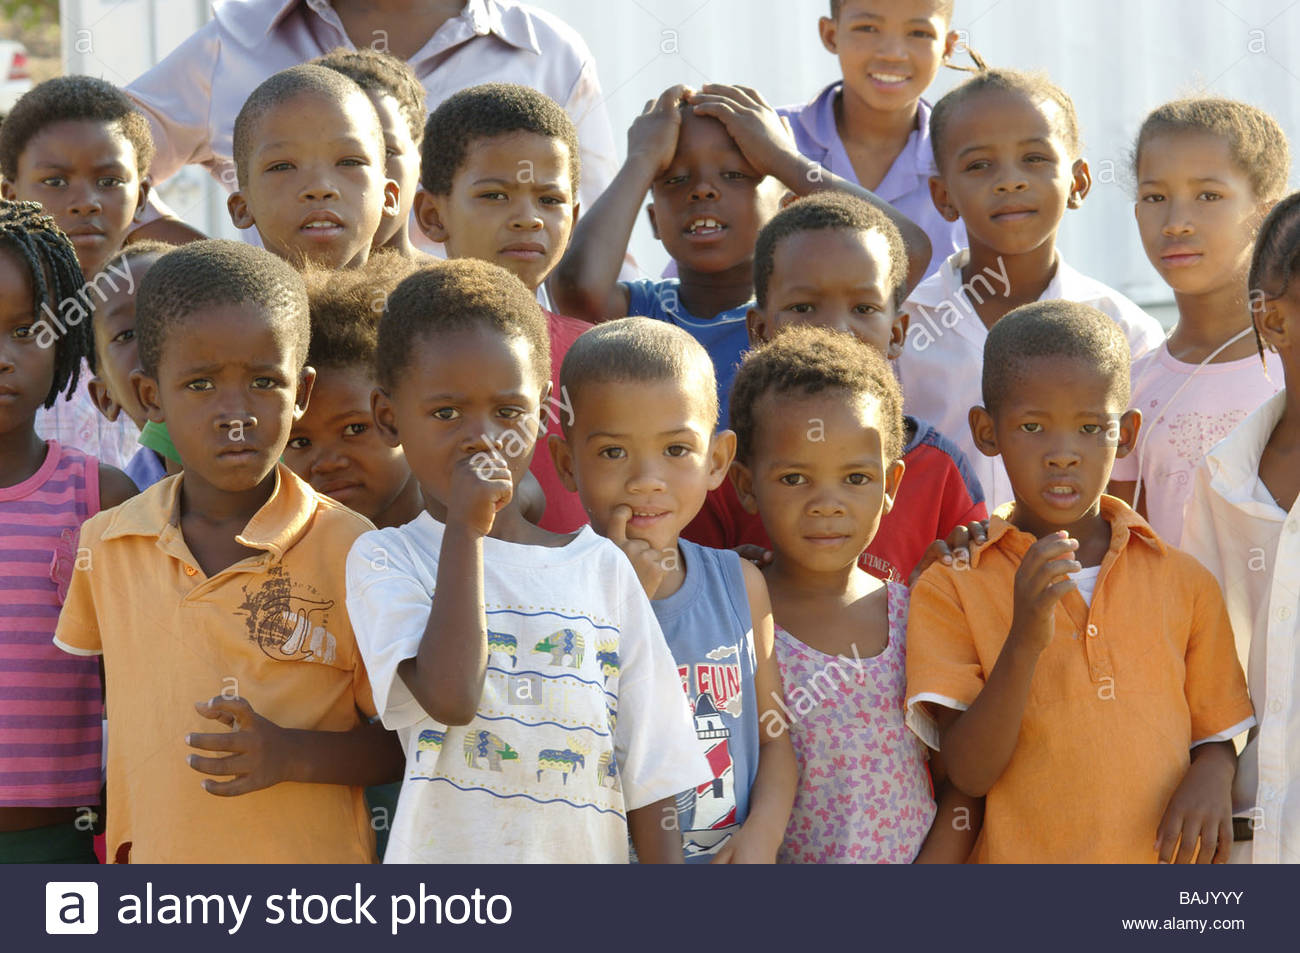 Image result for african boys and girls in poverty